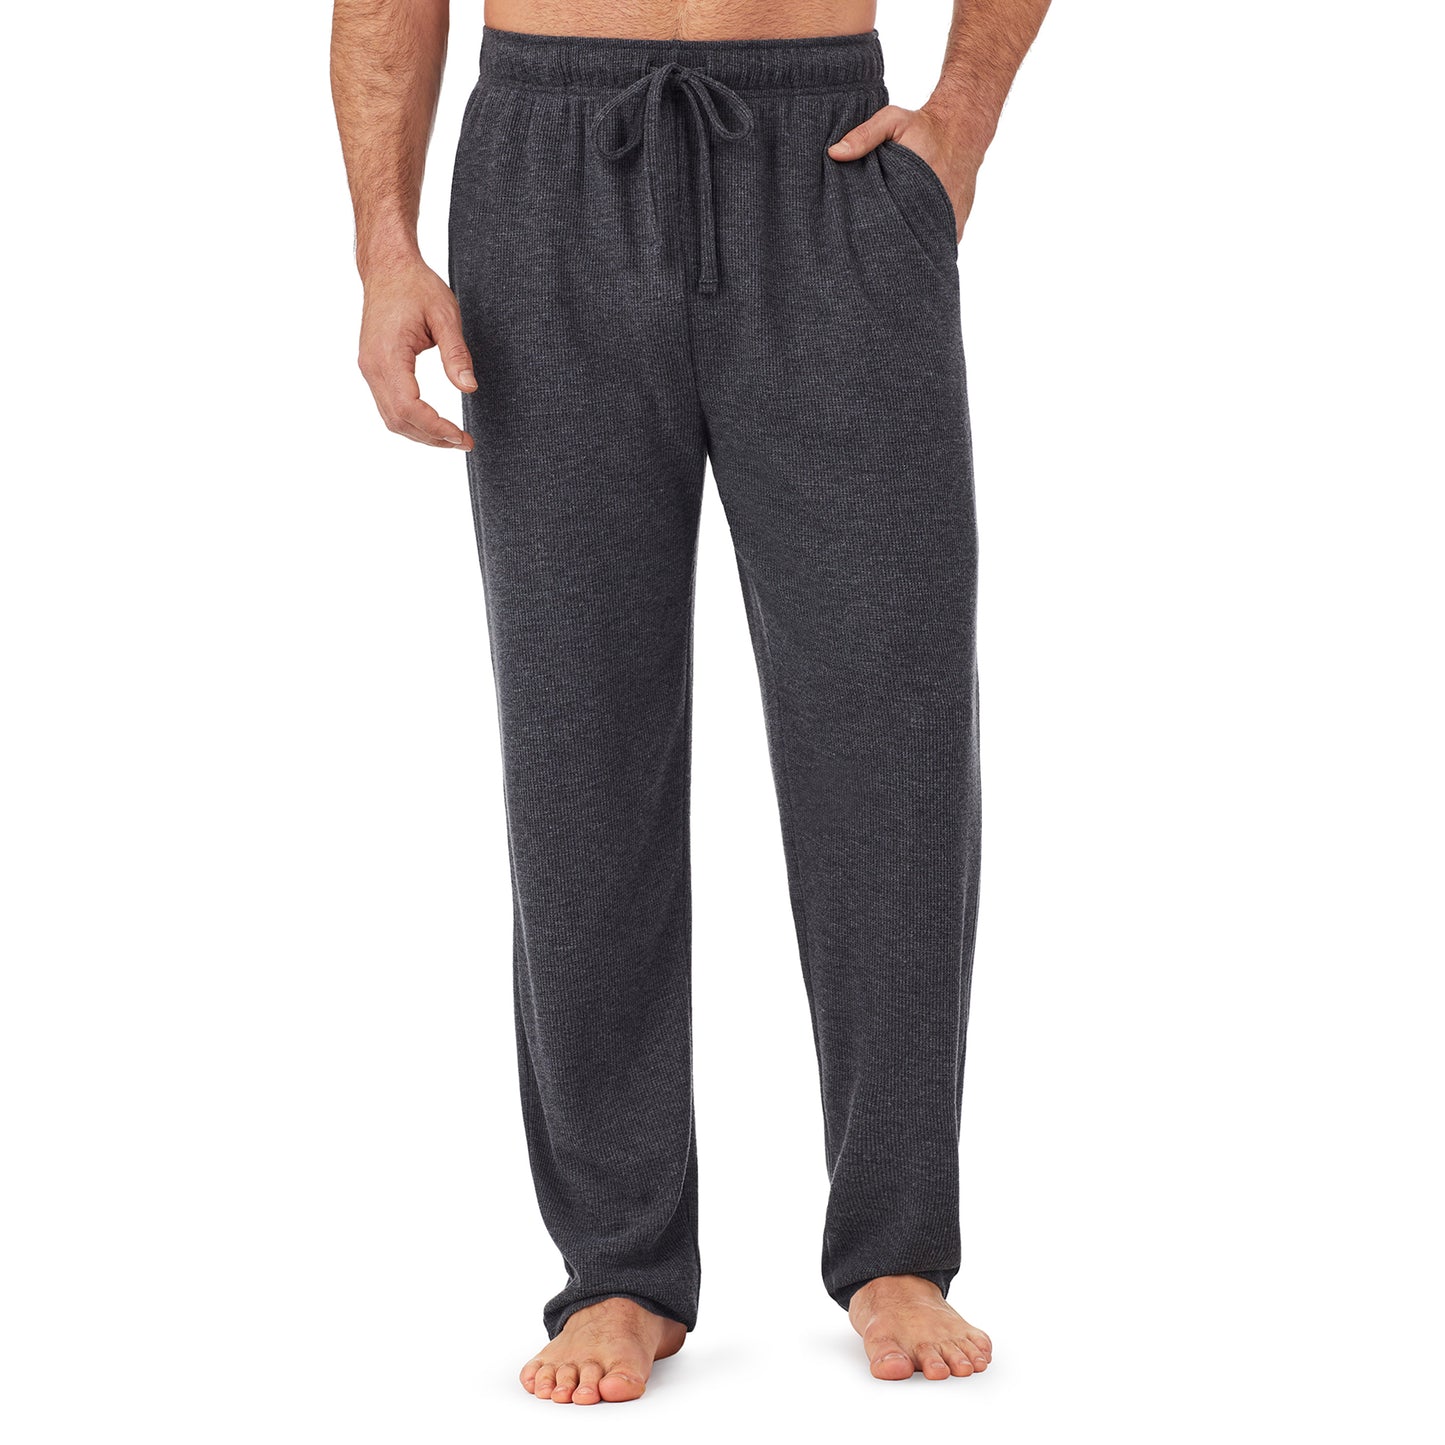 Charcoal Heather; Model is wearing size M. He is 6'1", Waist 31", Inseam 33". @A man wearing a charcoal heather waffle thermal relaxed pant.